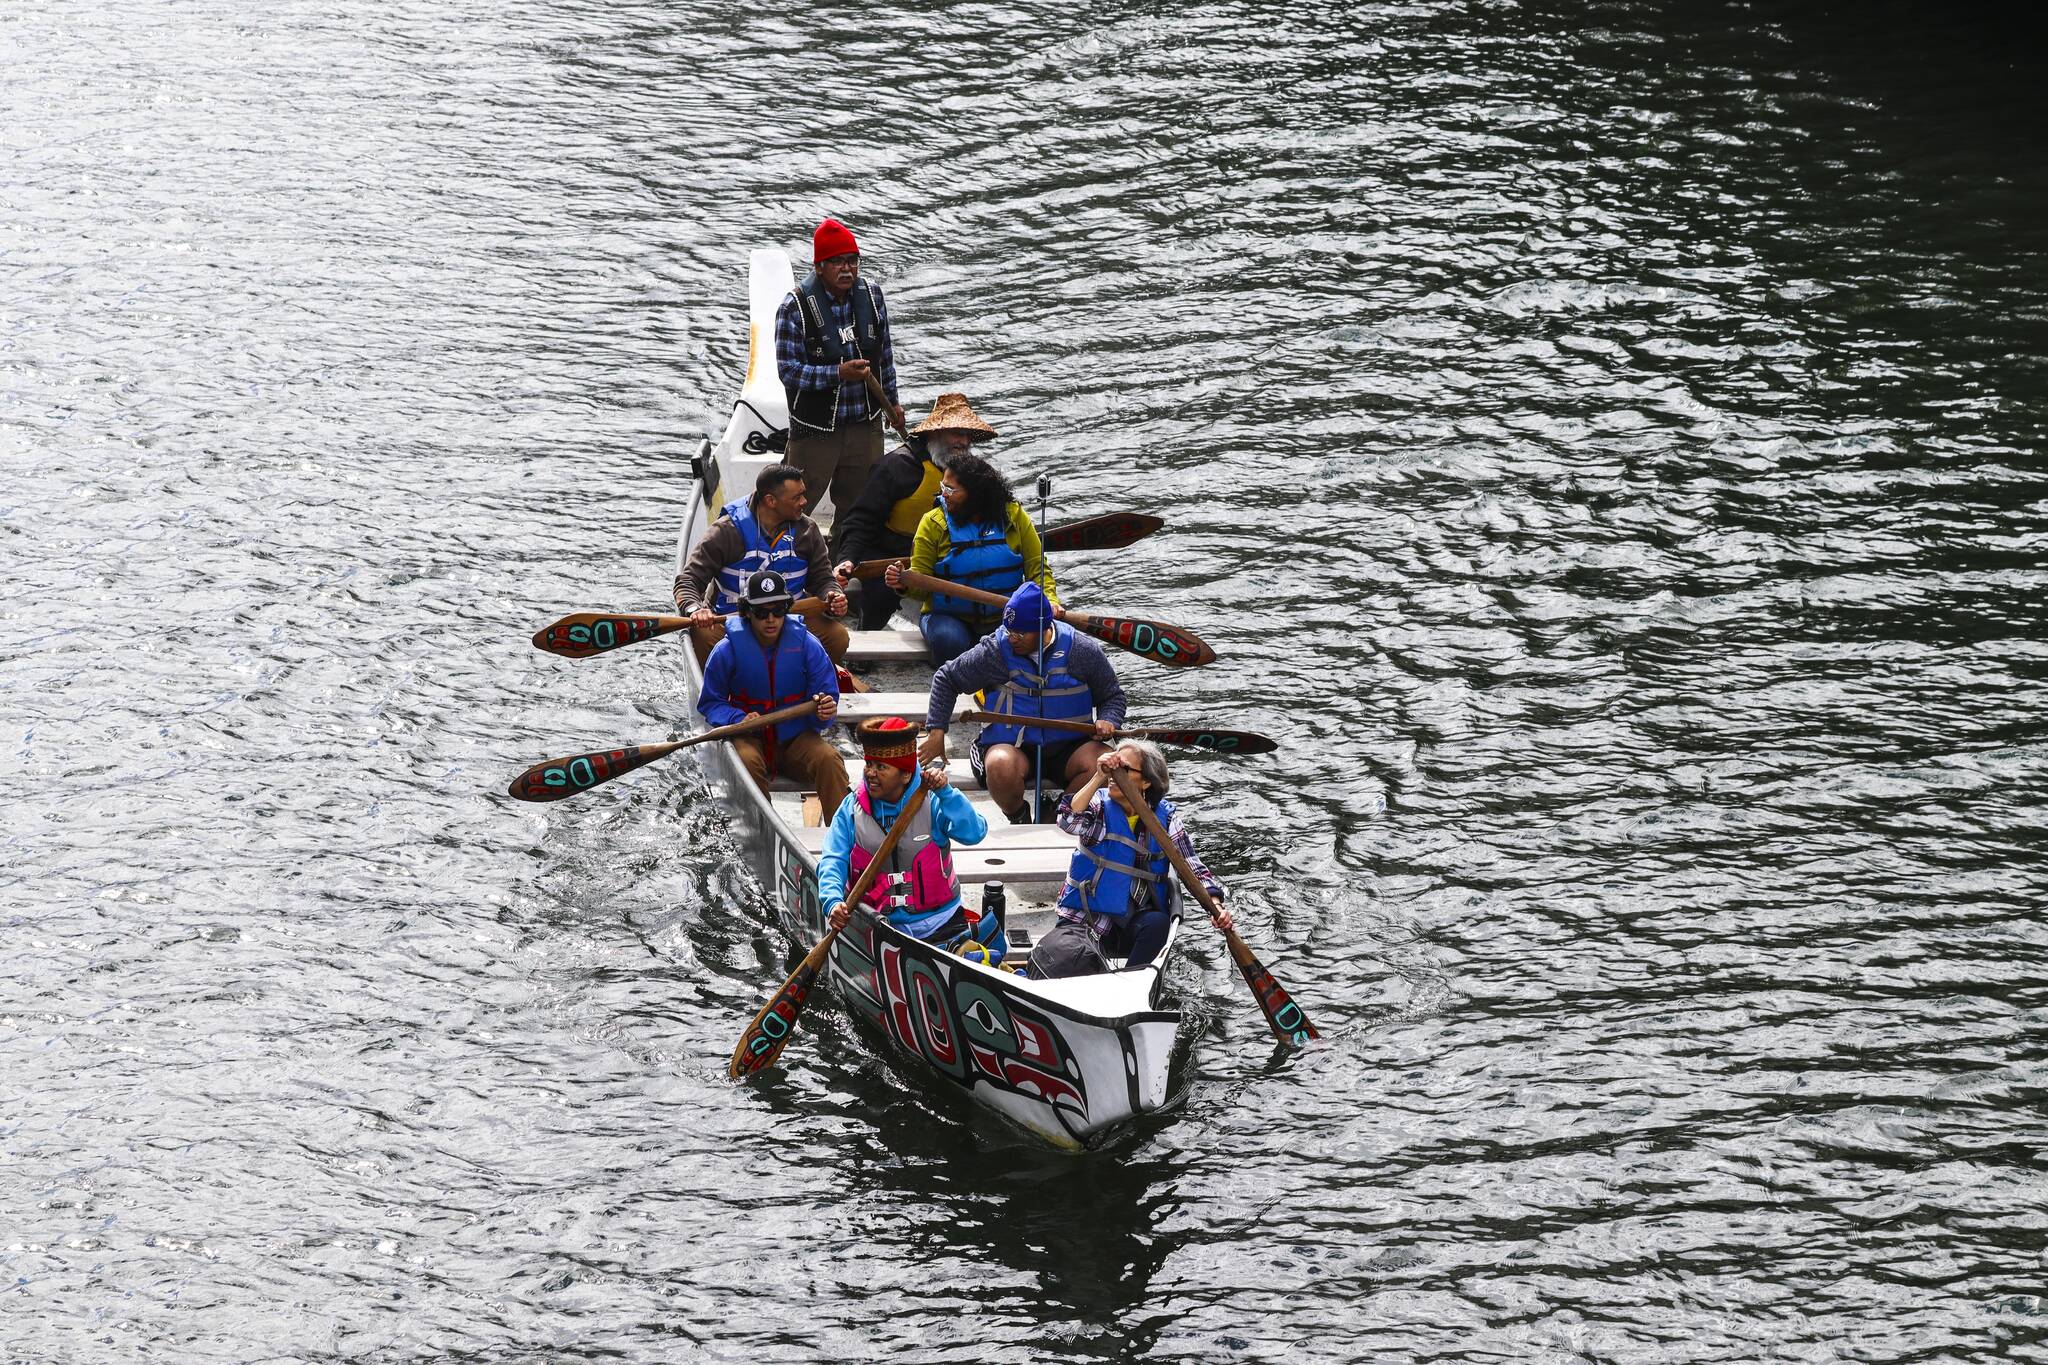 Members of One People Canoe Society paddle through Juneau harbor during the 12th Annual Maritime Festival on May 7, 2022. (Michael S. Lockett / Juneau Empire)